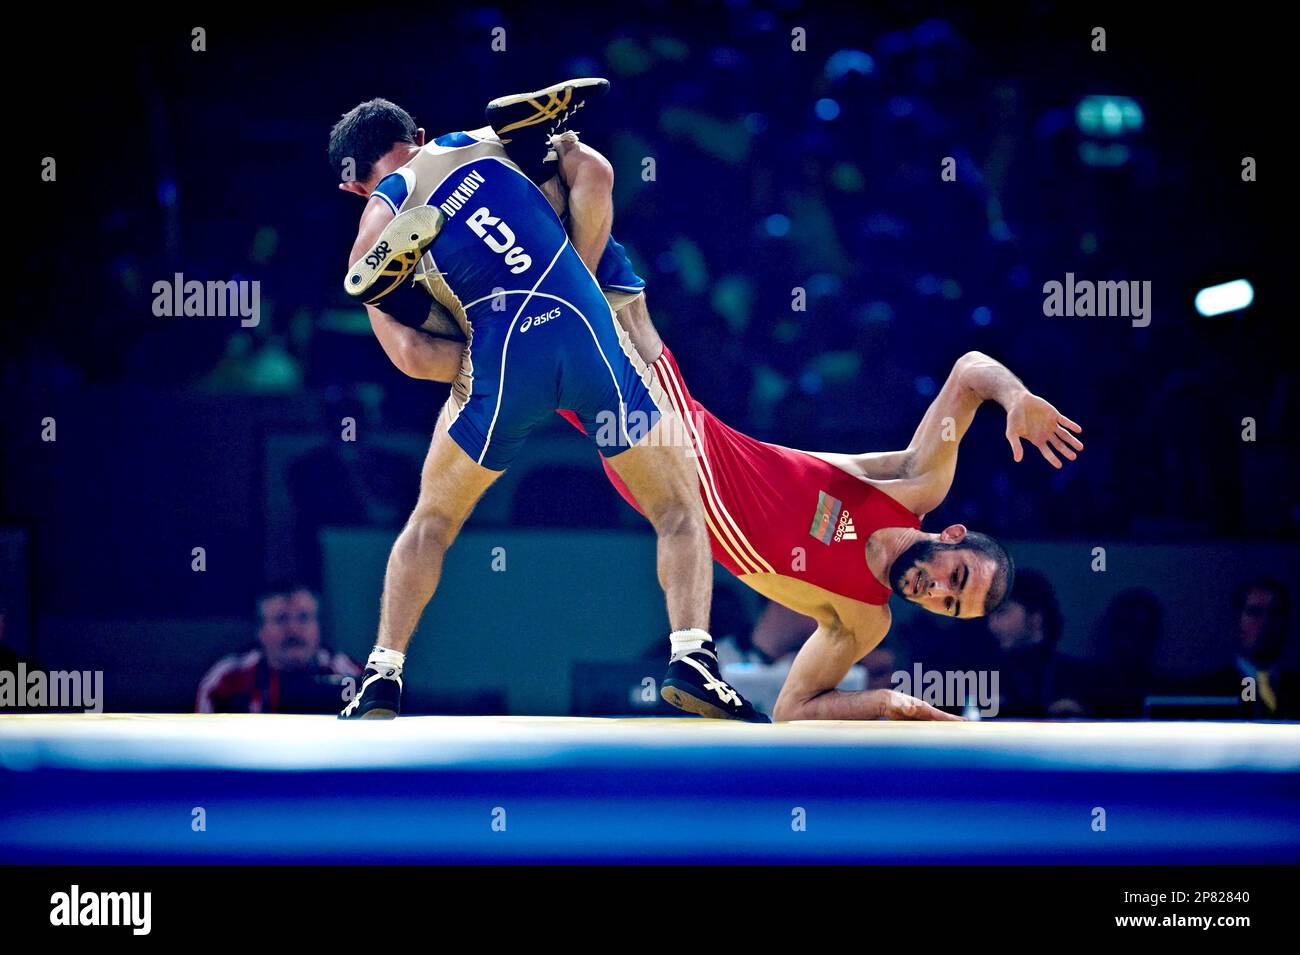 Russia's Besik Kudukhov, left, defeats Zalimkhan Huseynov from Azerbaidjan  in the 60 kilo freestyle class at the wrestling world championships finals  in Herning, Denmark, Tuesday, Sept. 22, 2009. (AP Photo/POLFOTO, Claus  Bonnerup) **